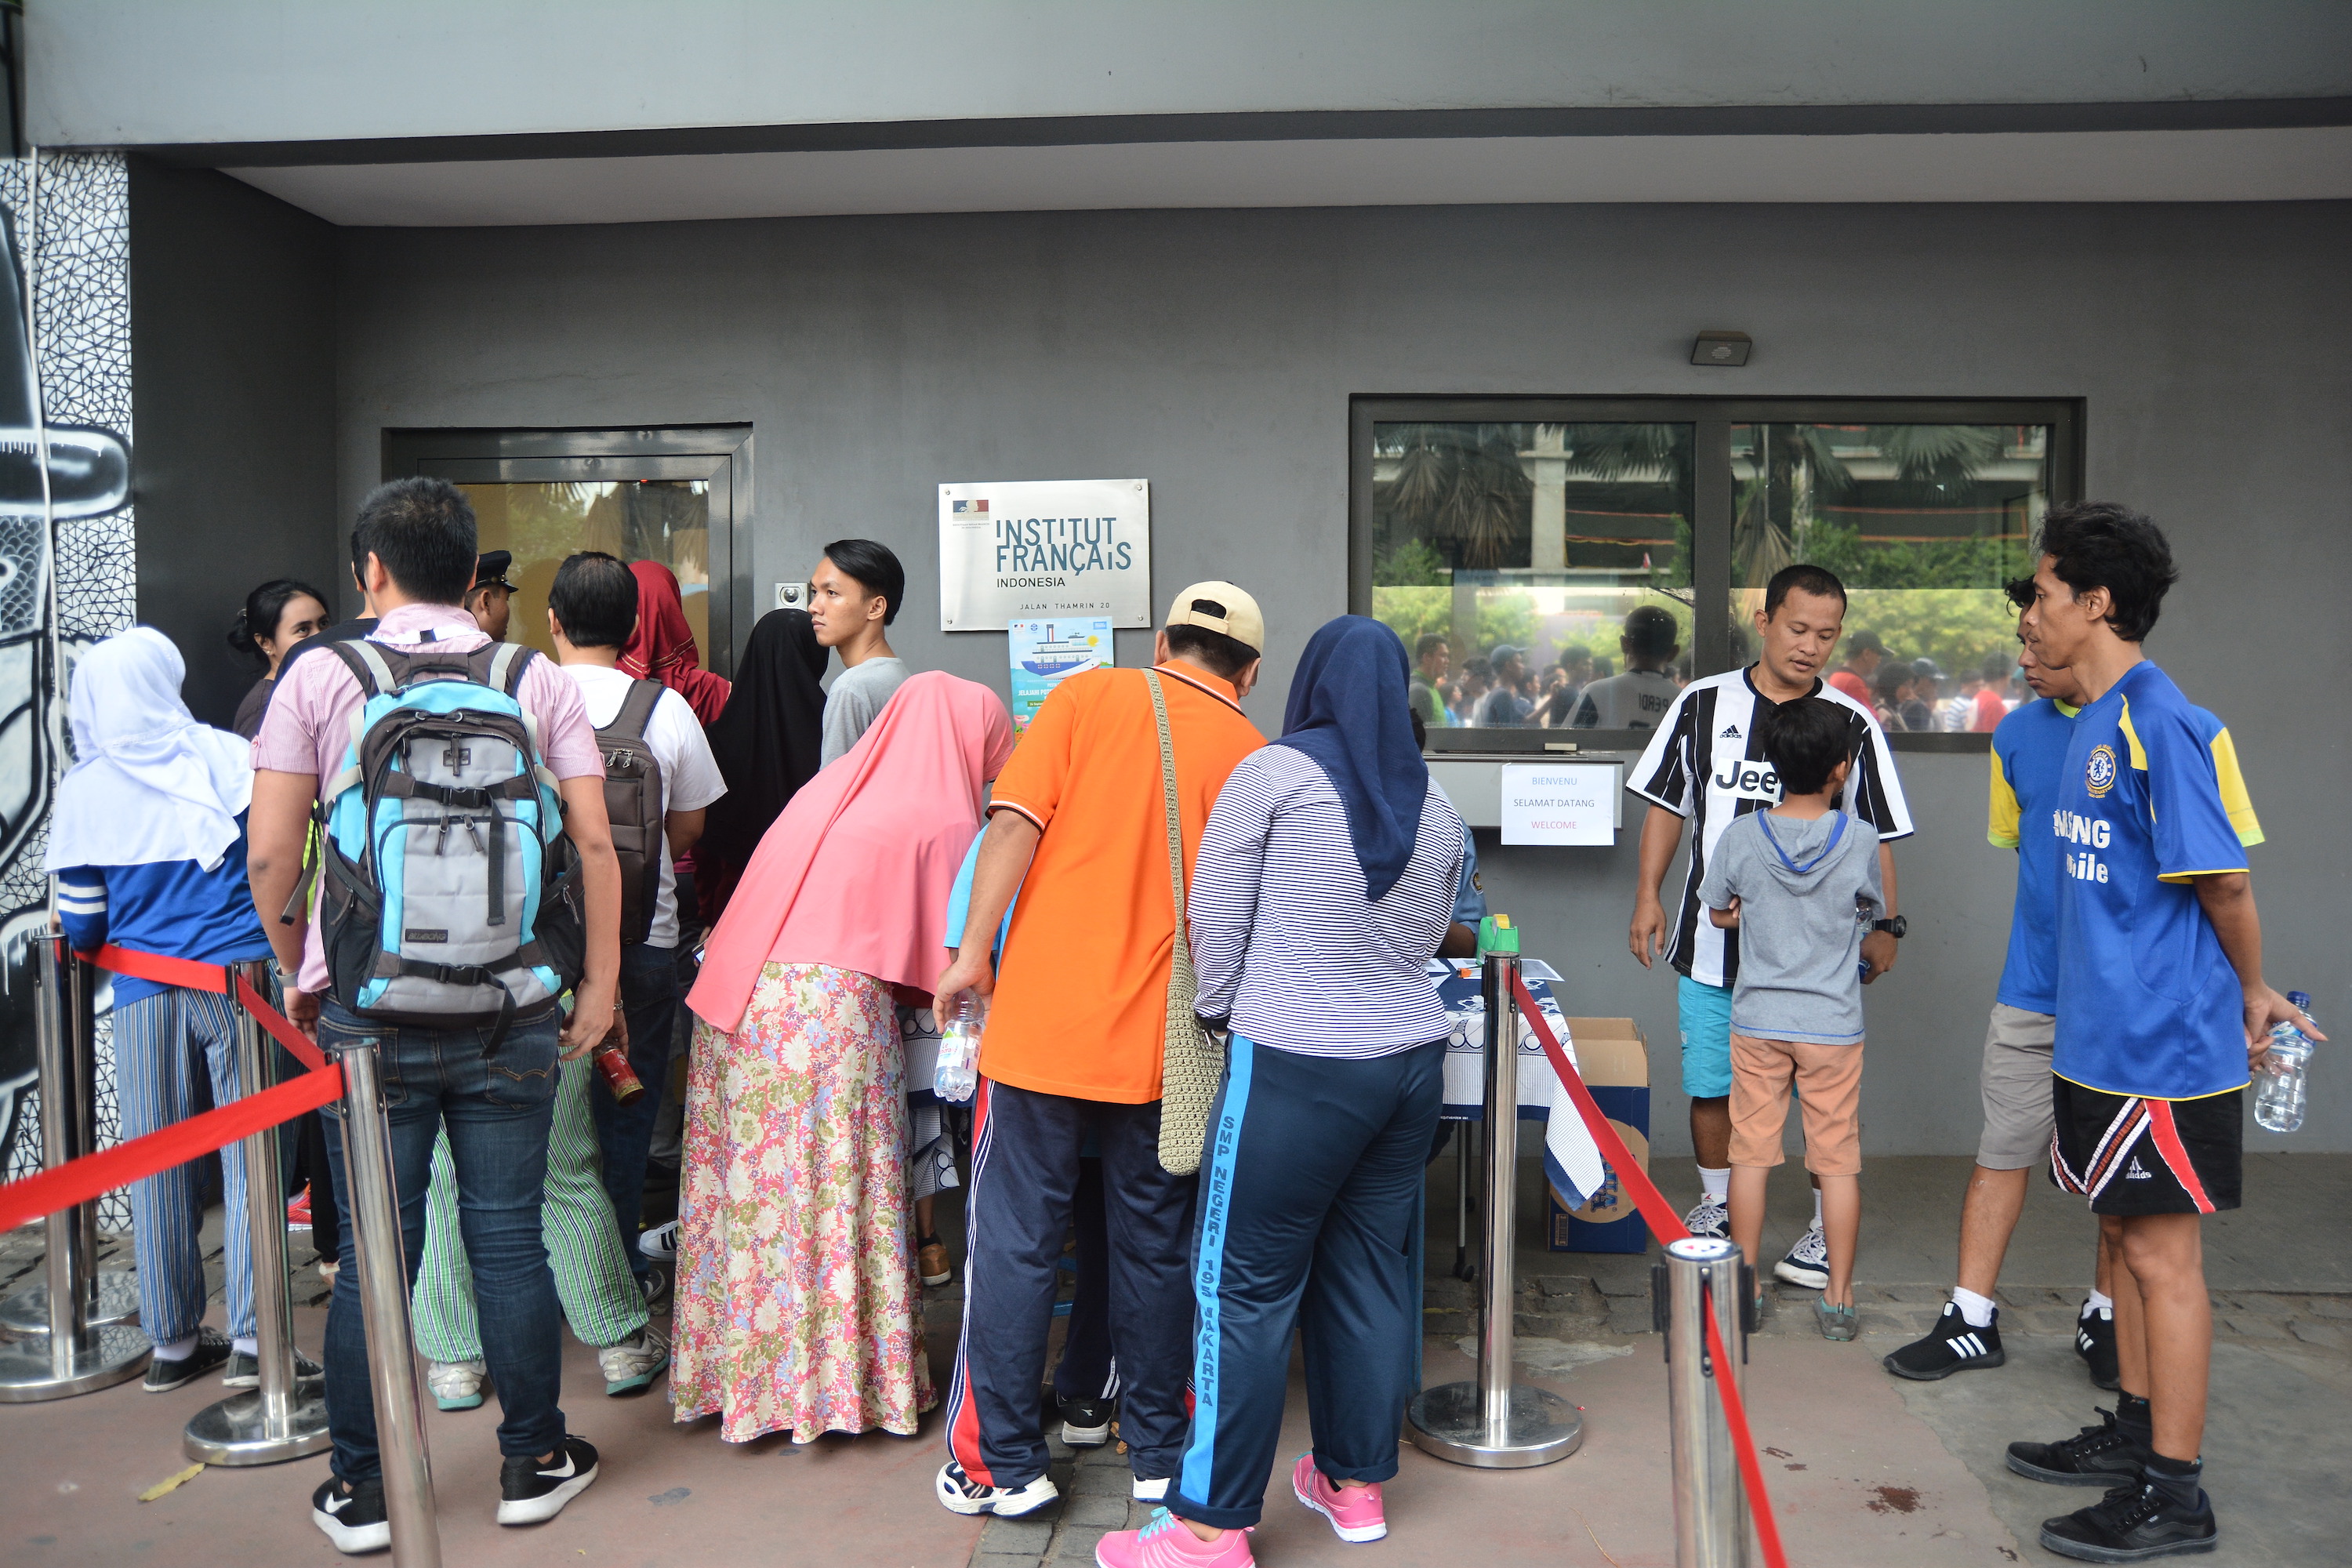 People queue to join the festivities inside the French Embassy in Jakarta (Source: IFI/Ndaru Wicaksono)